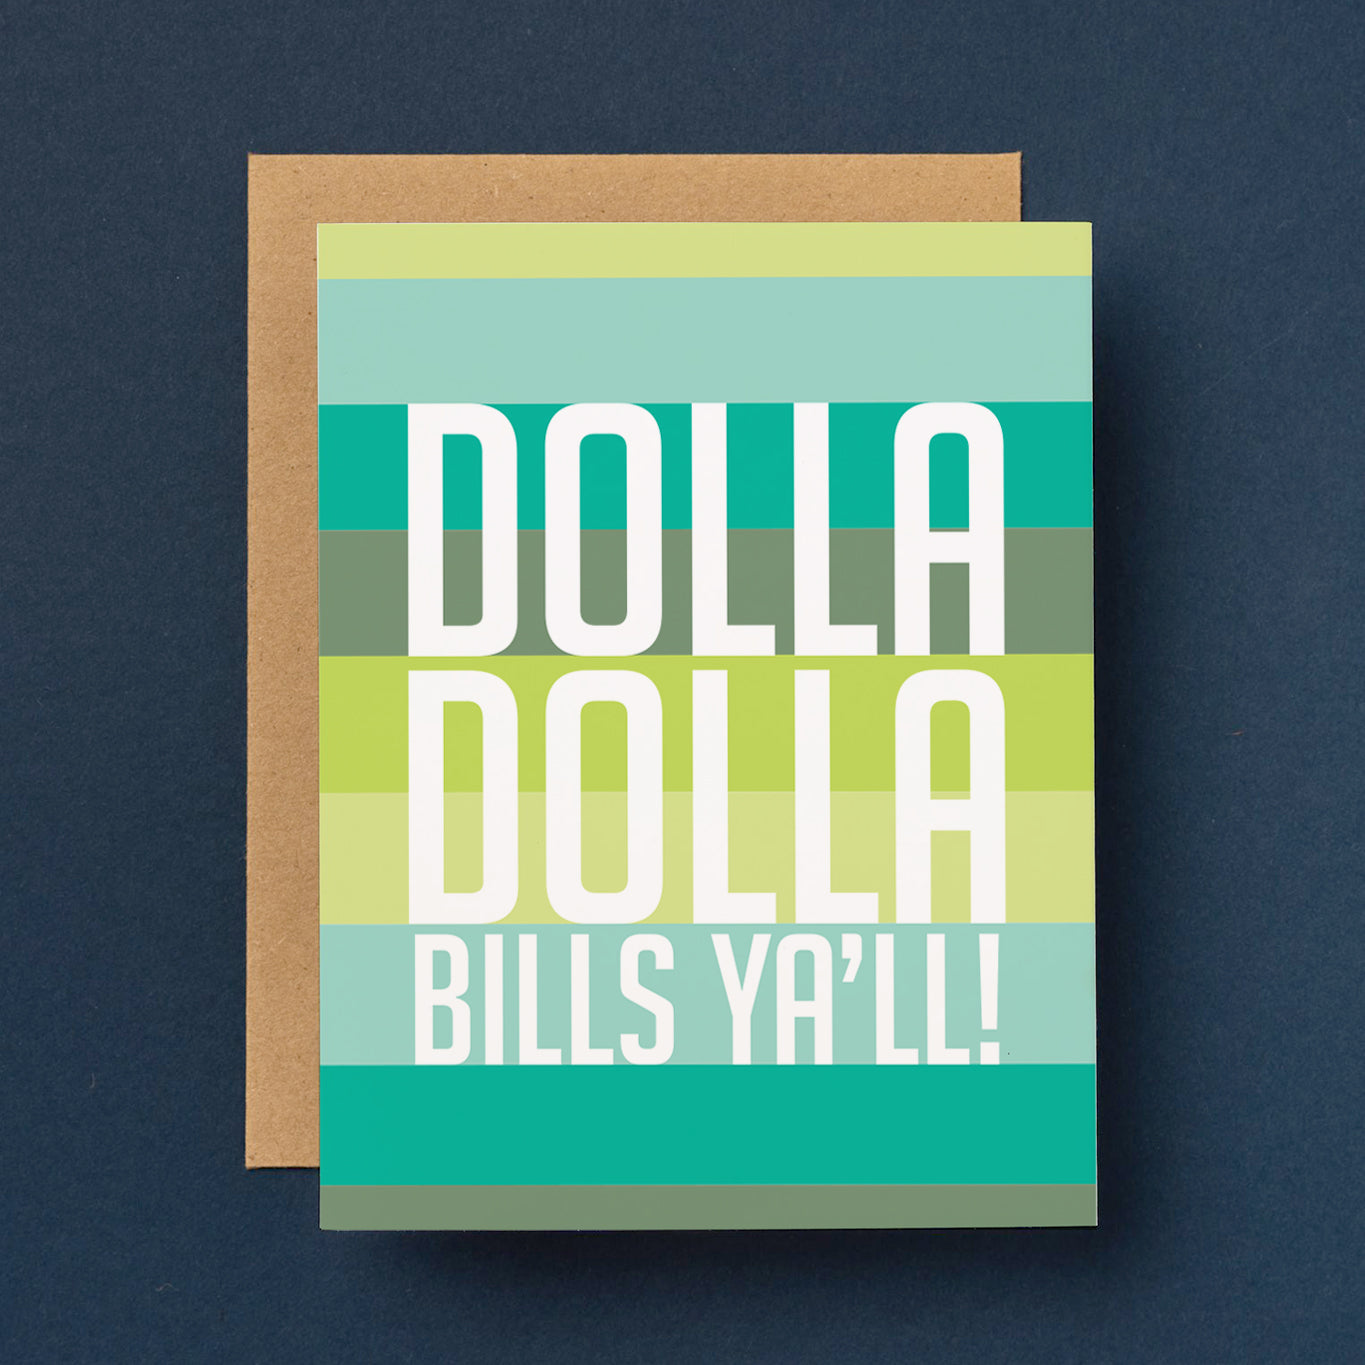 A creative birthday or gift greeting card to tuck money inside of. Front reads "Dolla Dolla Bills Ya'll!" Colorful design with stripes